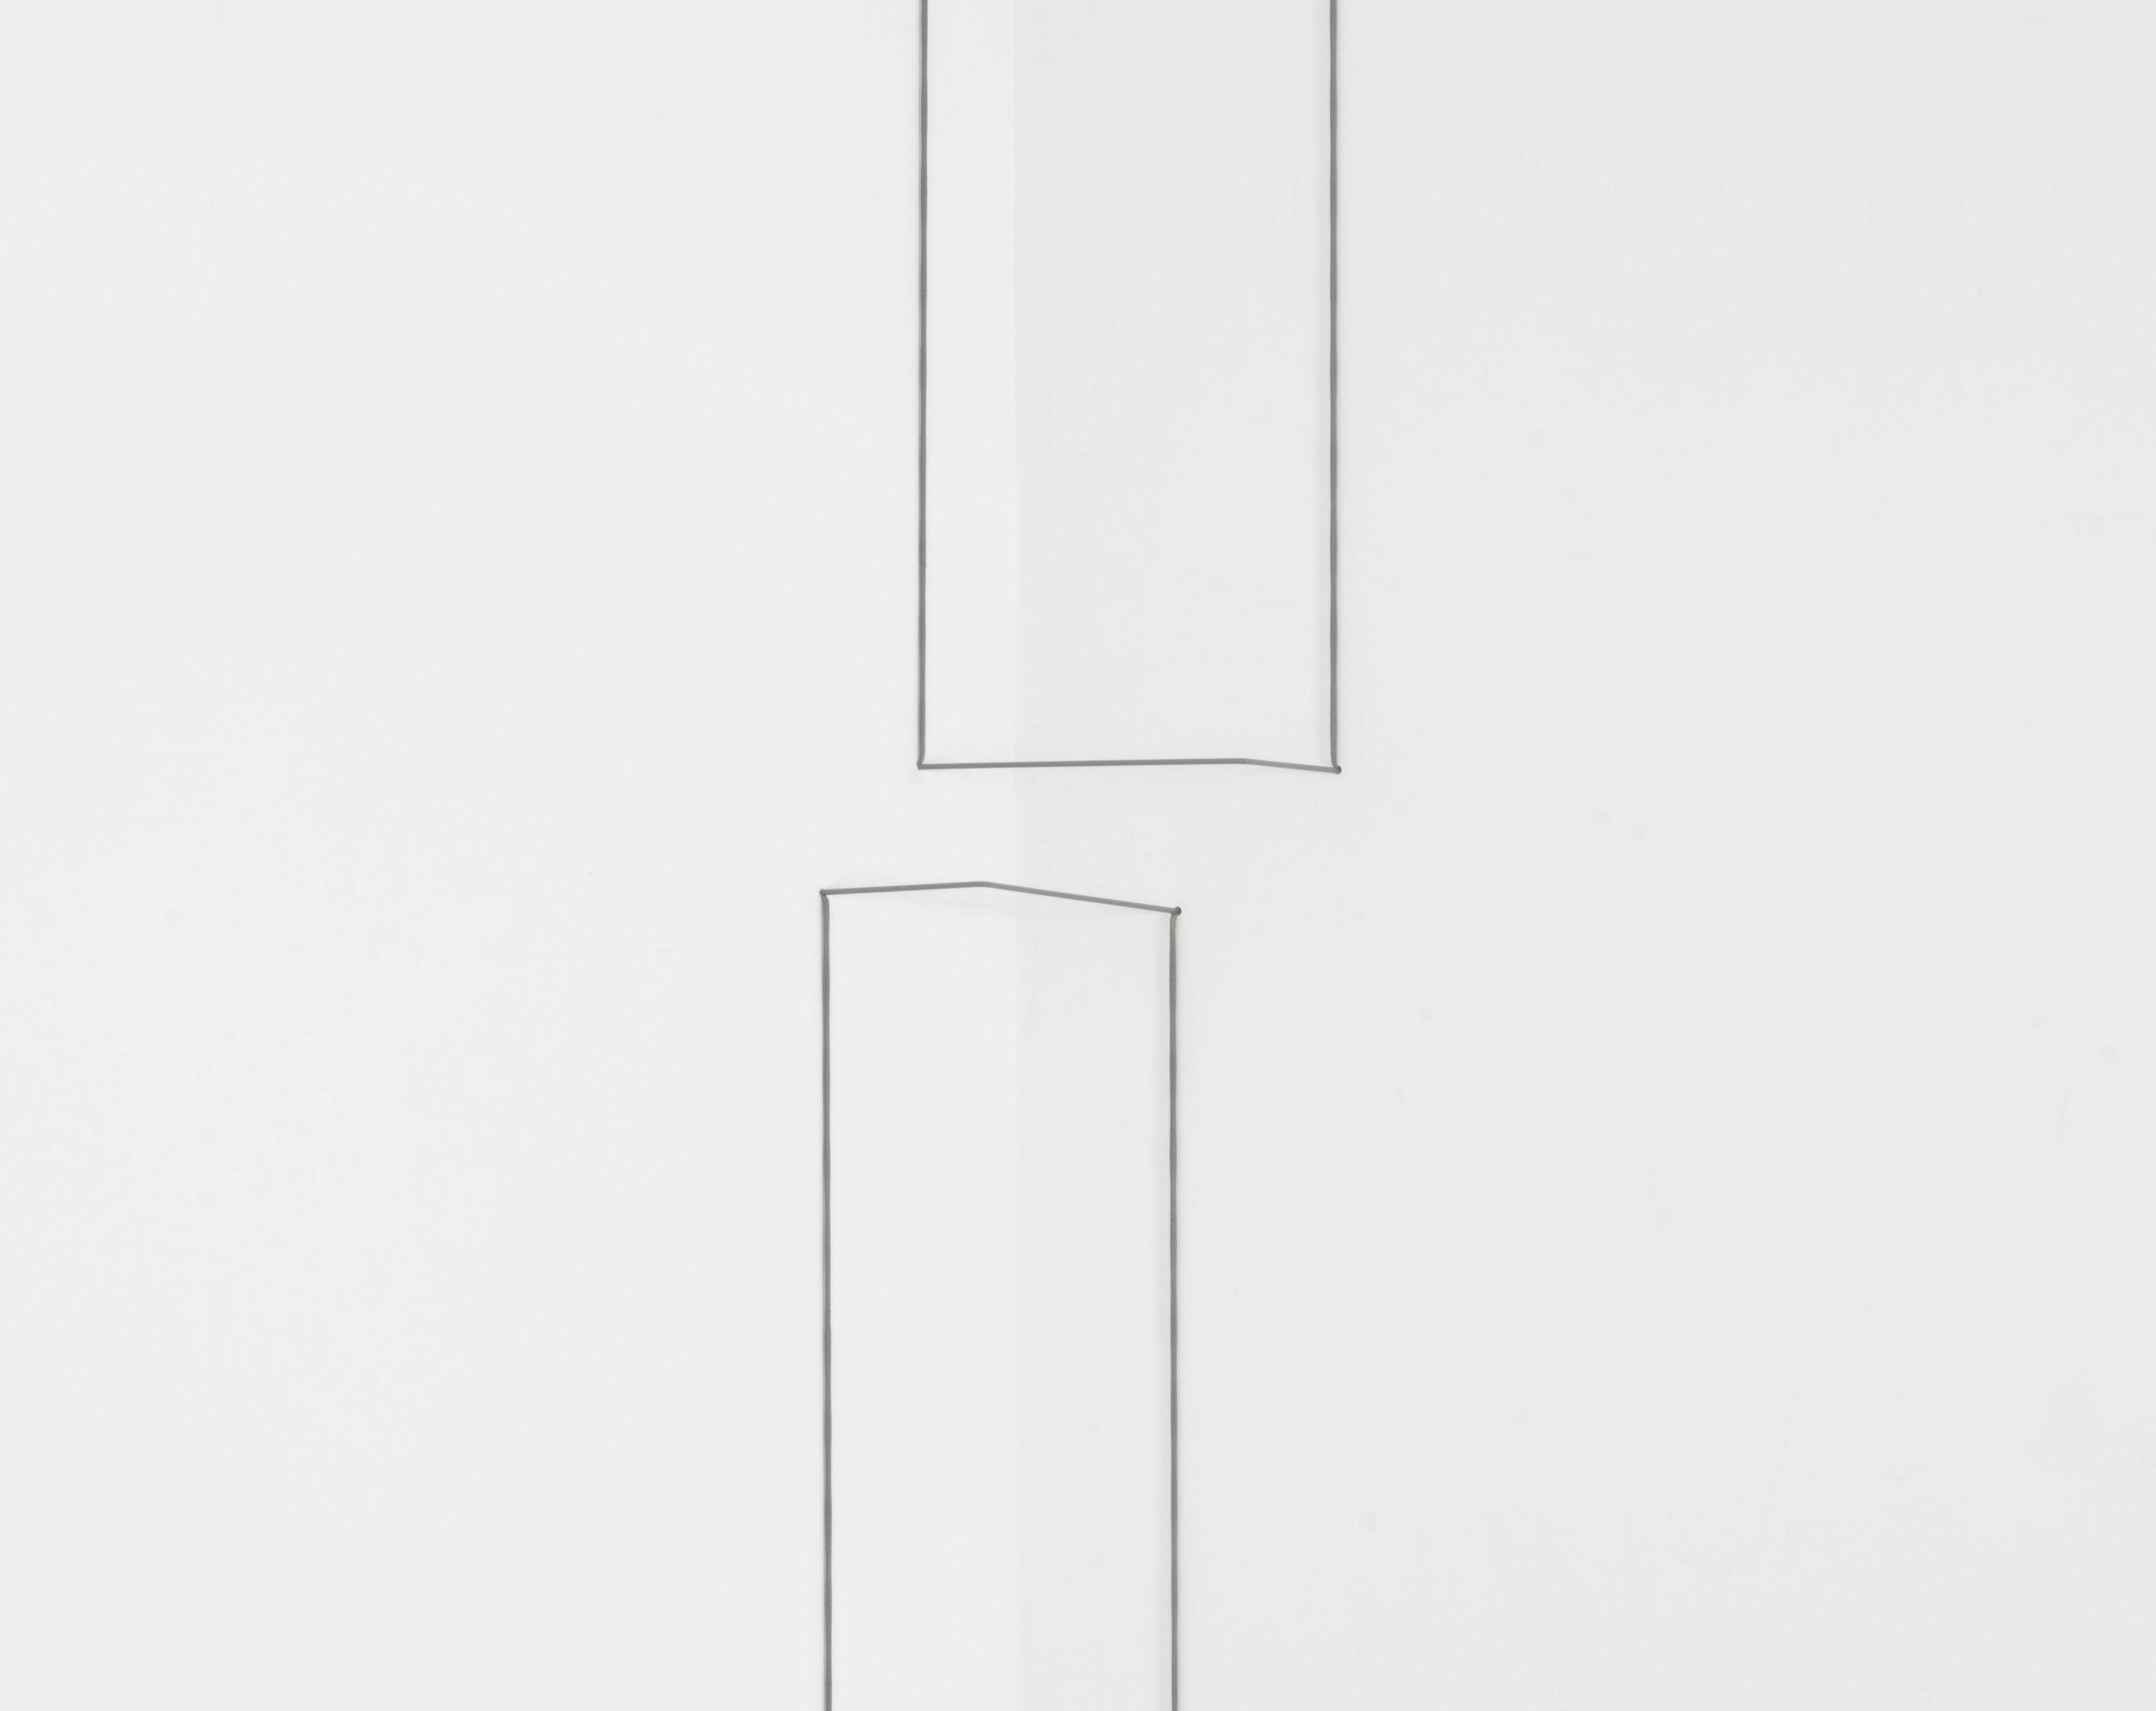 A sculpture by Fred Sandback, titled Untitled (RLL of A Series of Eight Sculptures, Closed Series), dated 1969.